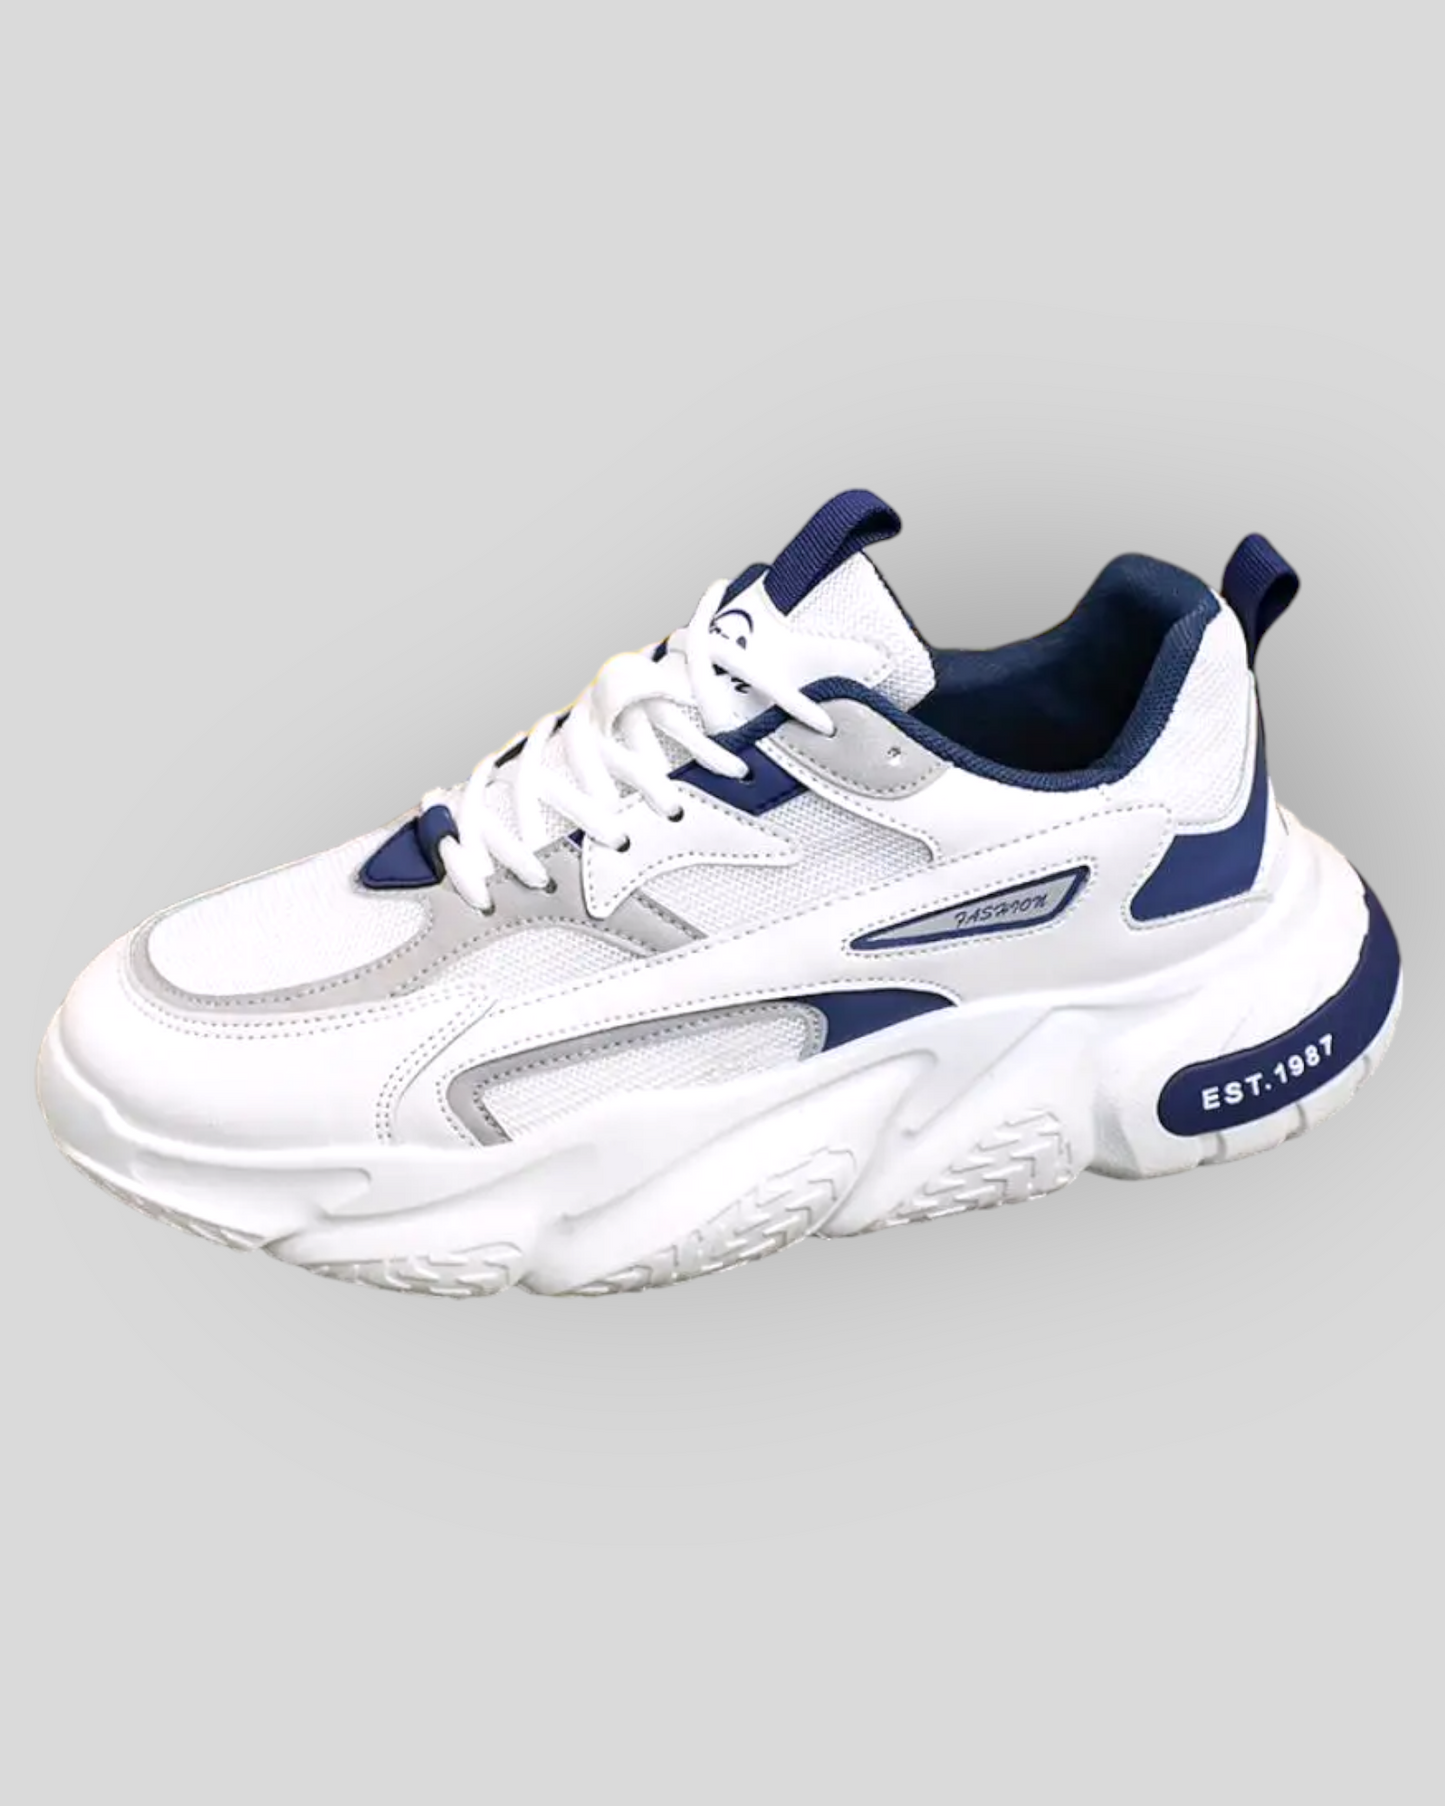 Men's Versatile Chunky White blue Sneakers/ Trainers/ Shoes